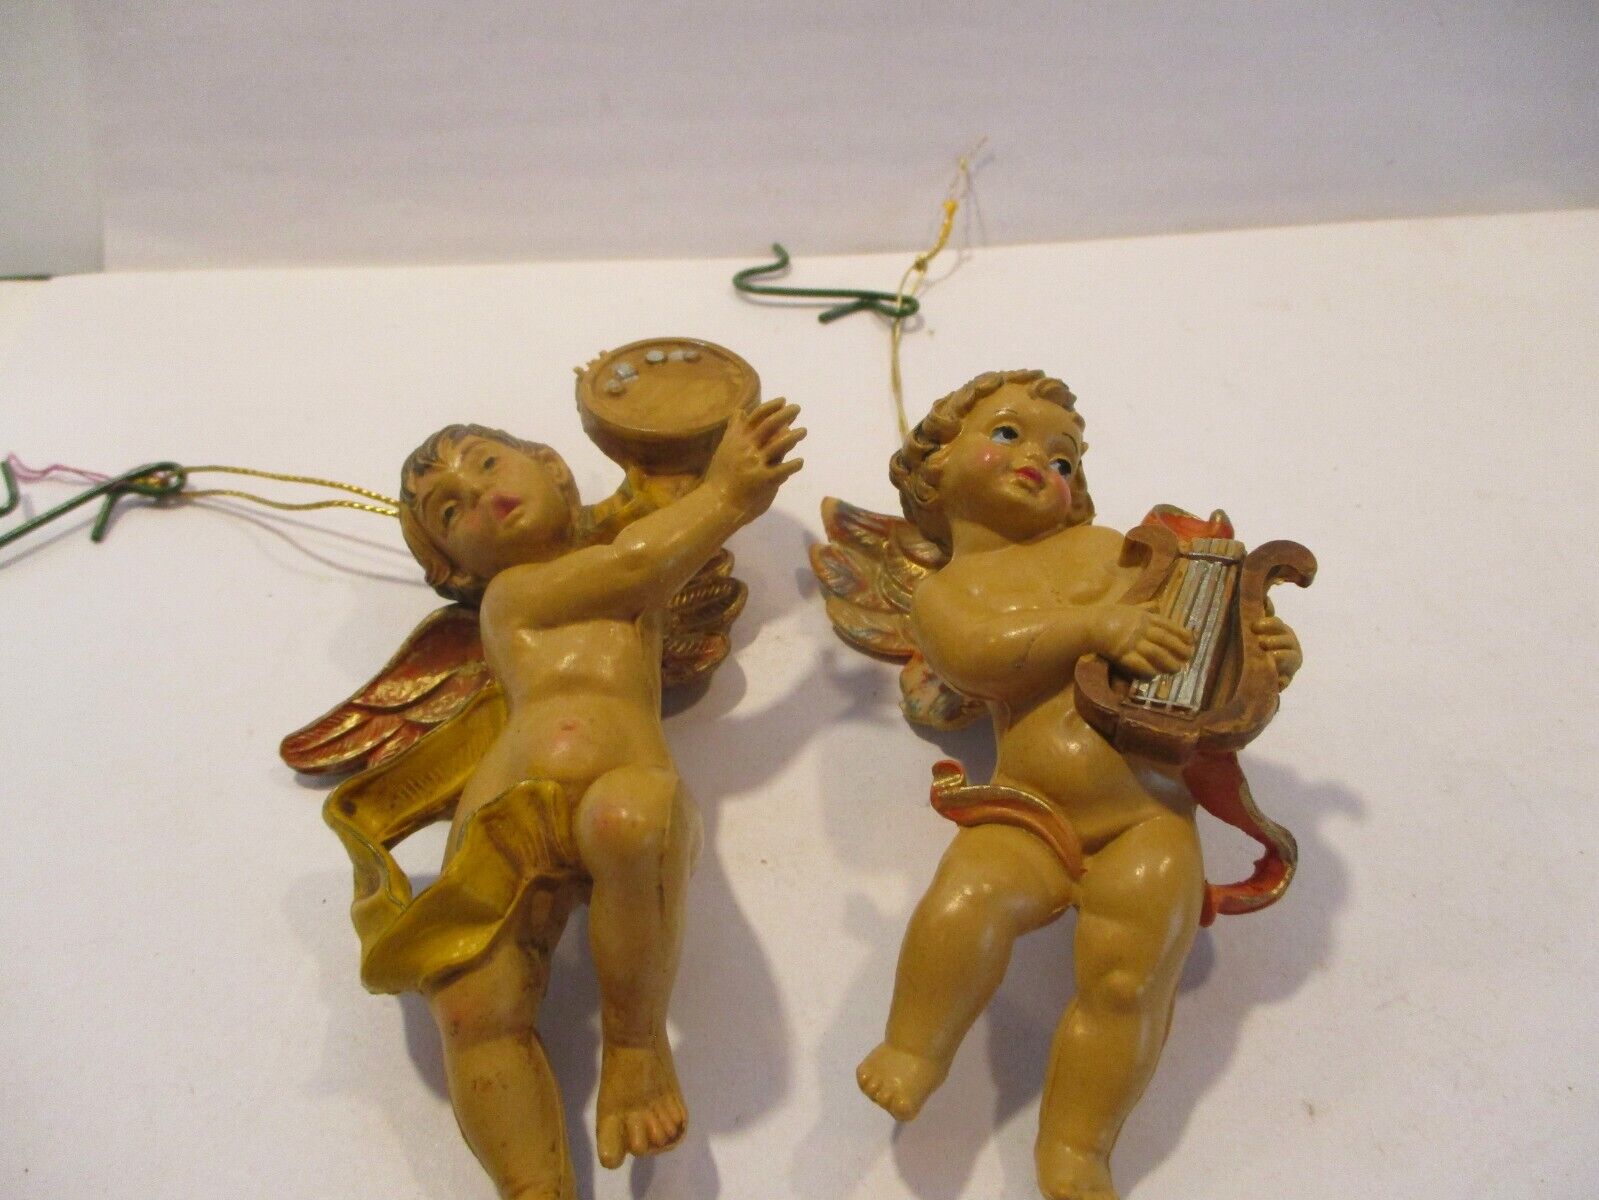 2 Medium Angels with Musical Instruments from Italy